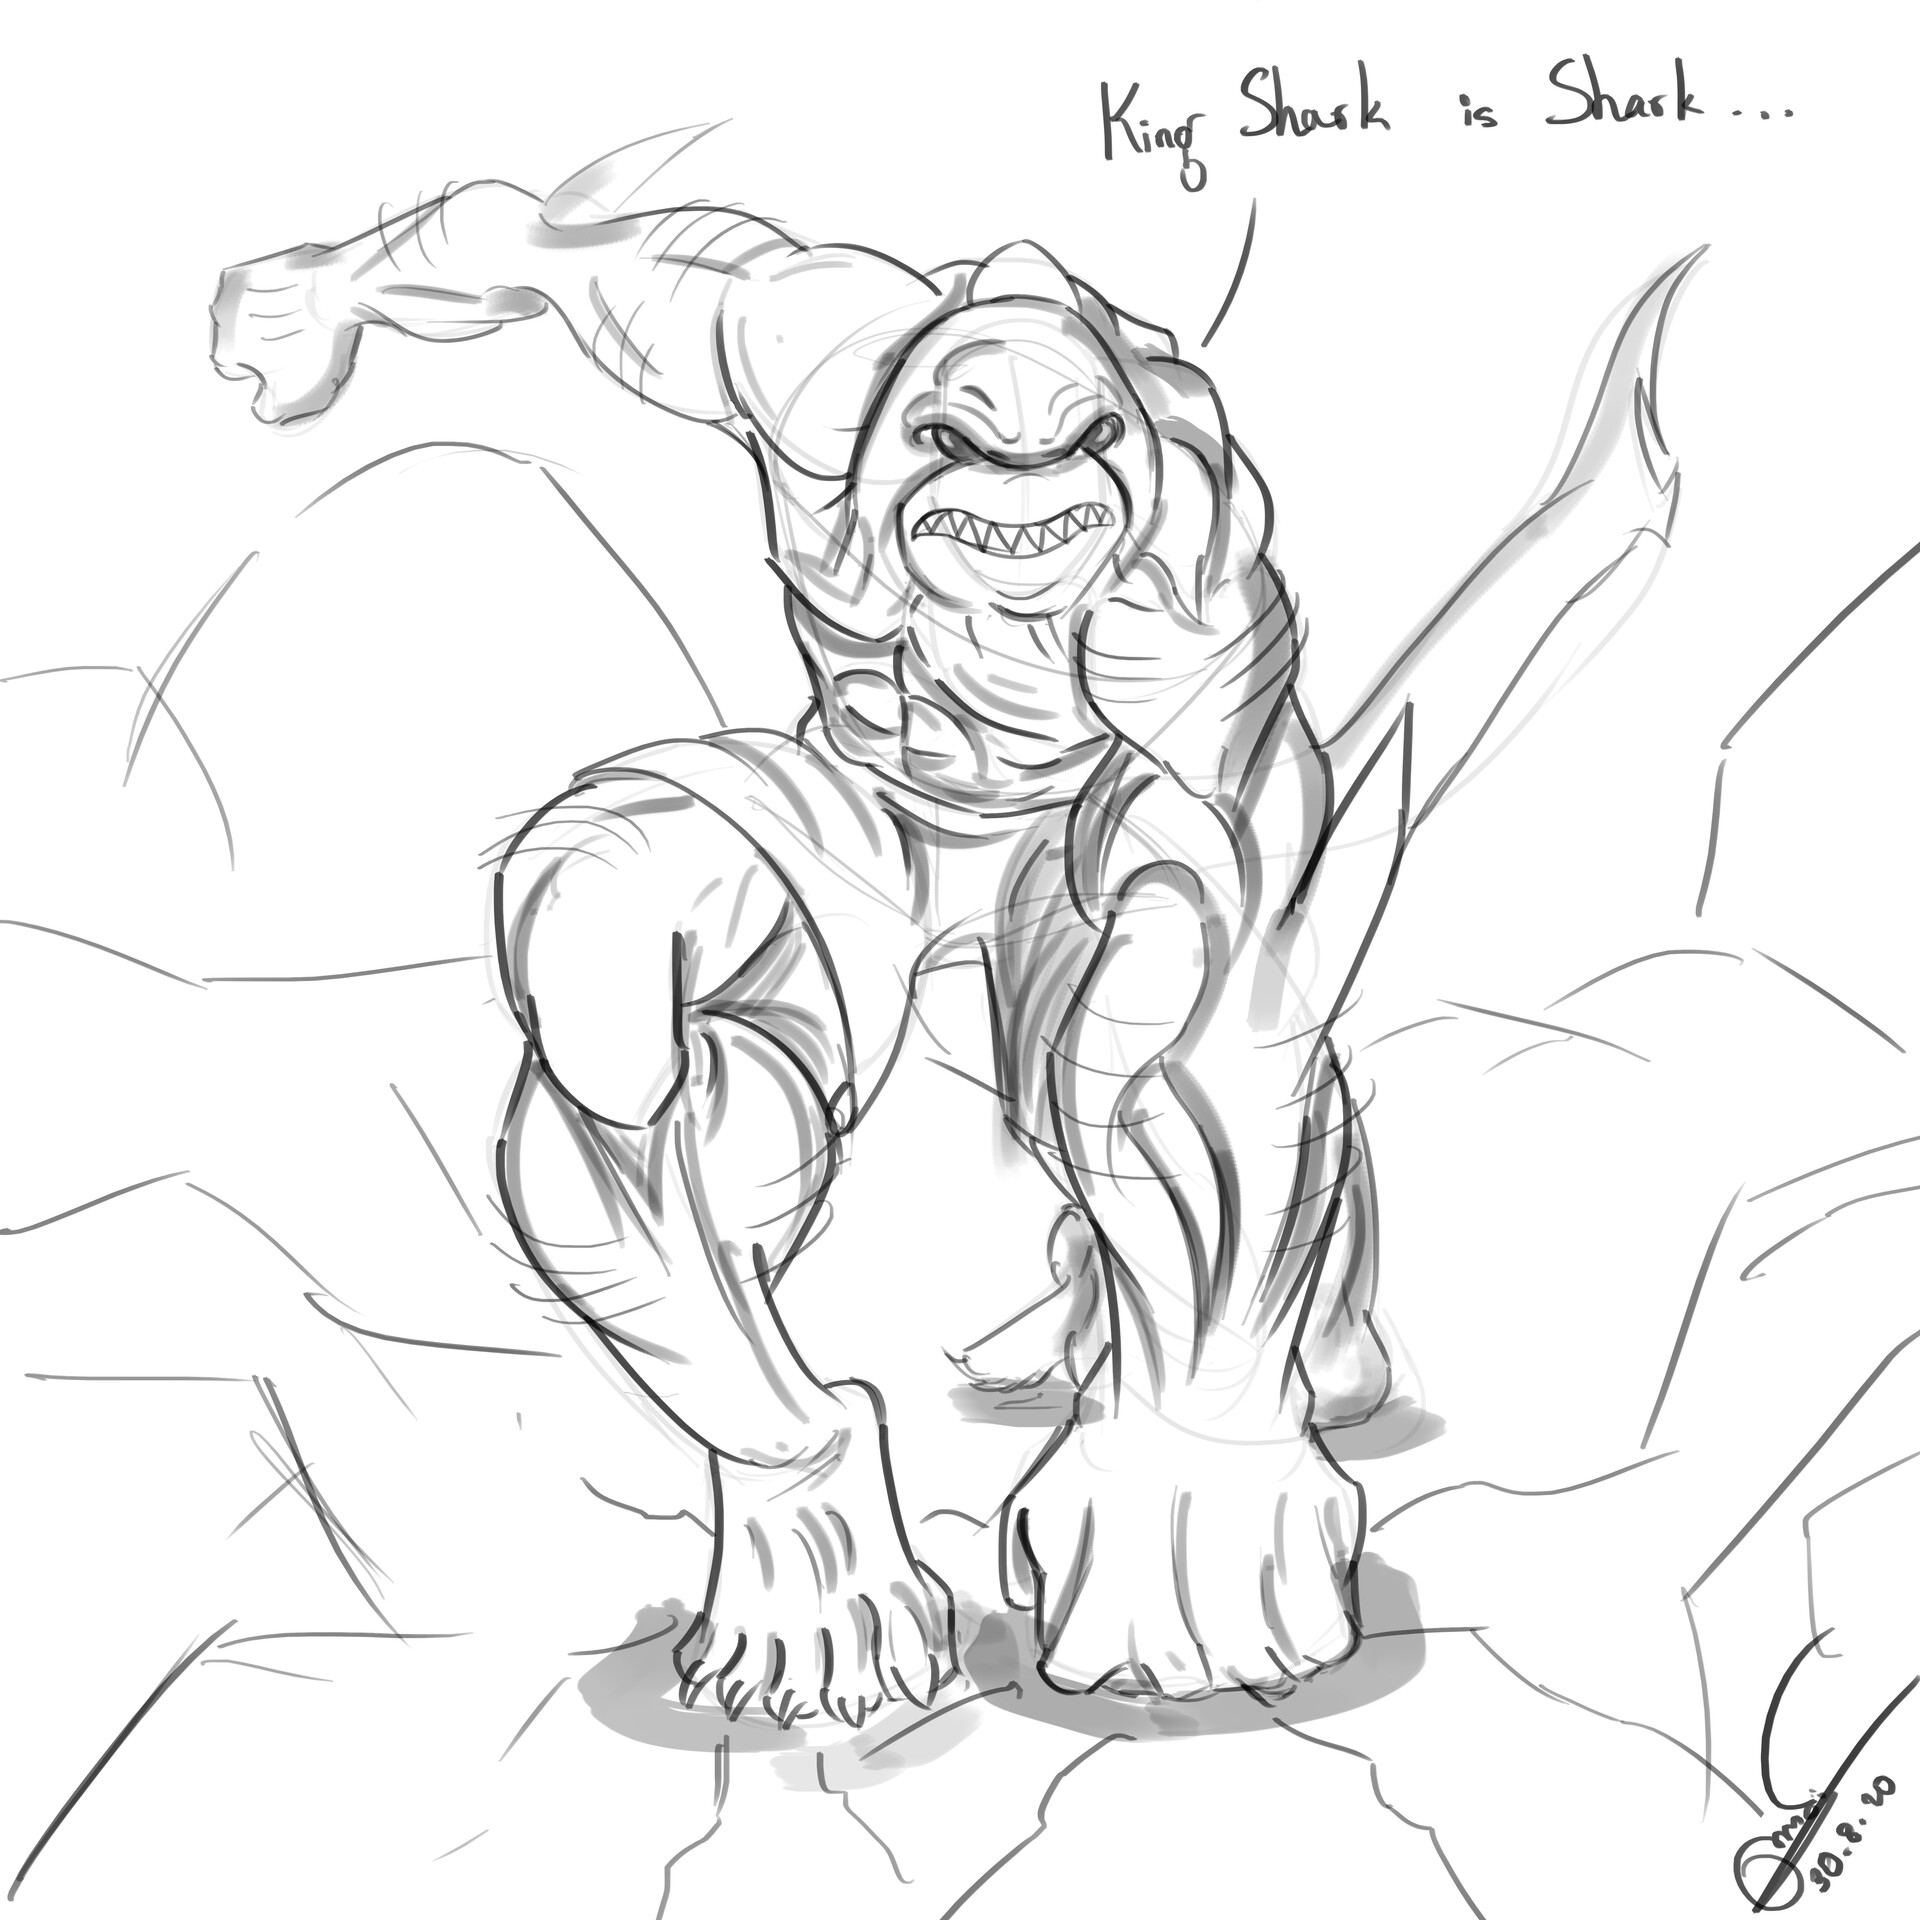 Kaung Khant Zaw - let's draw villain also anti-hero this time. The Mighty King  Shark's sketch